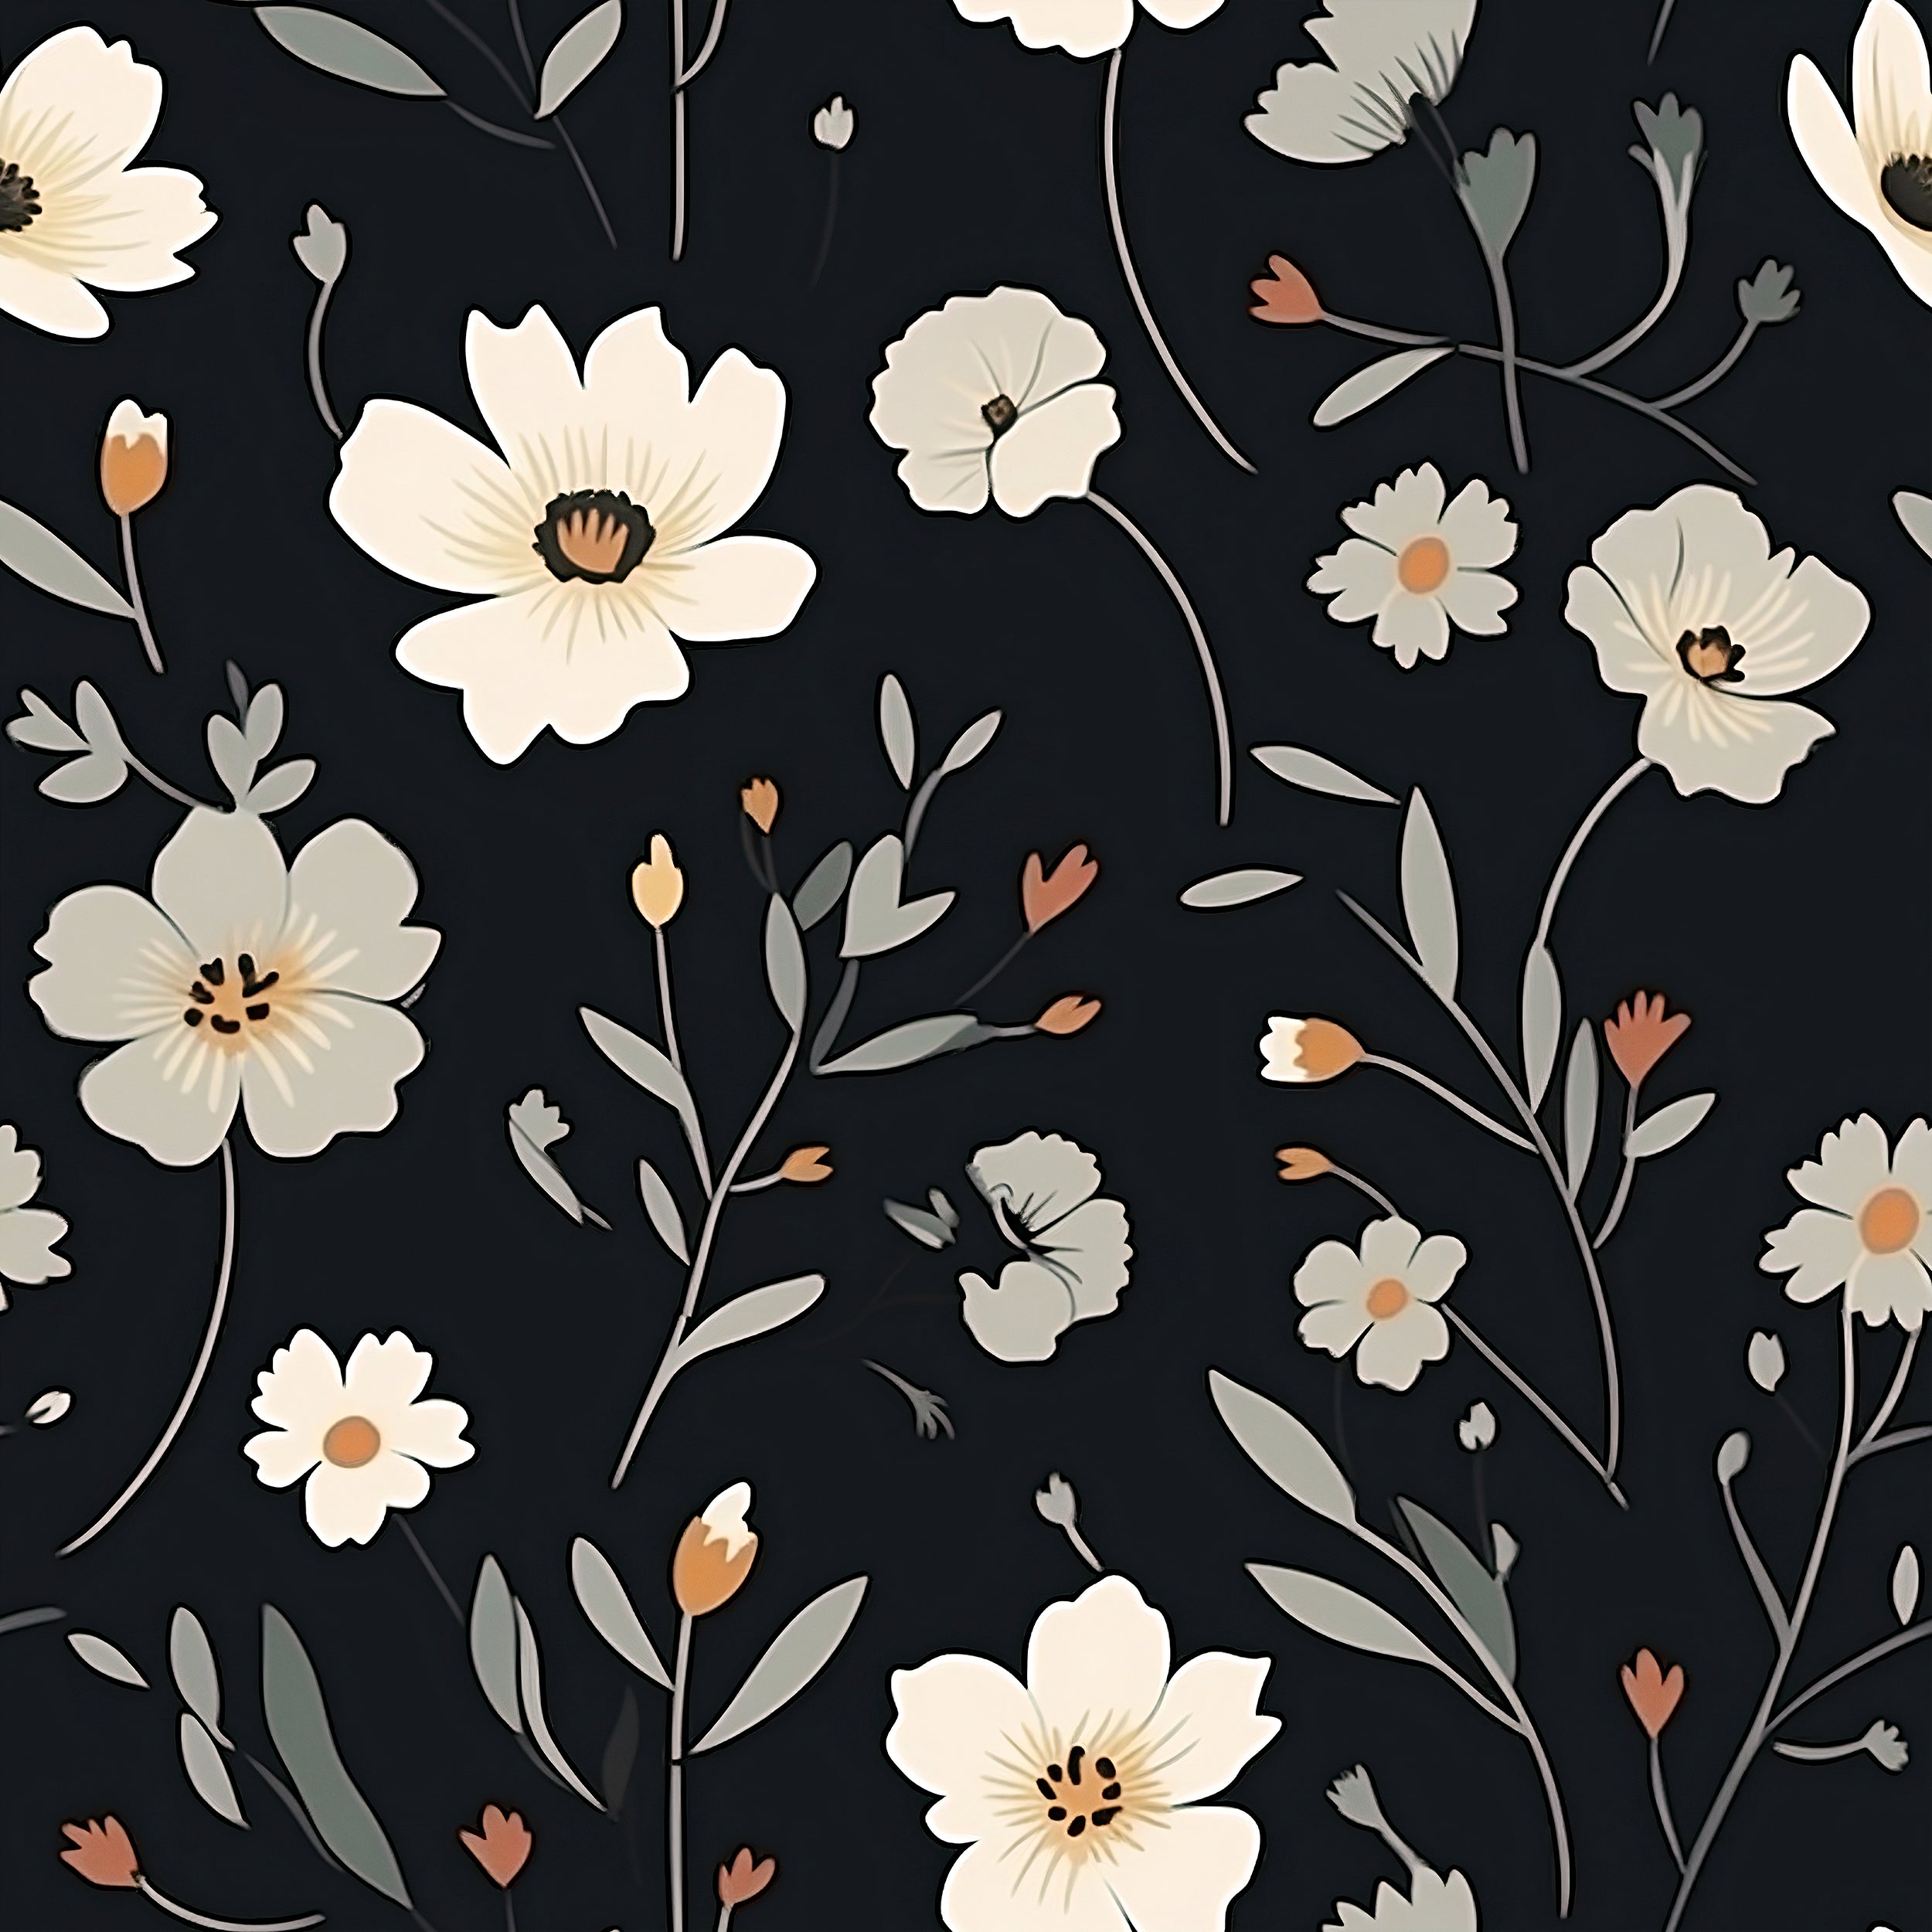 Sophisticated Dark Floral Mural for Interiors